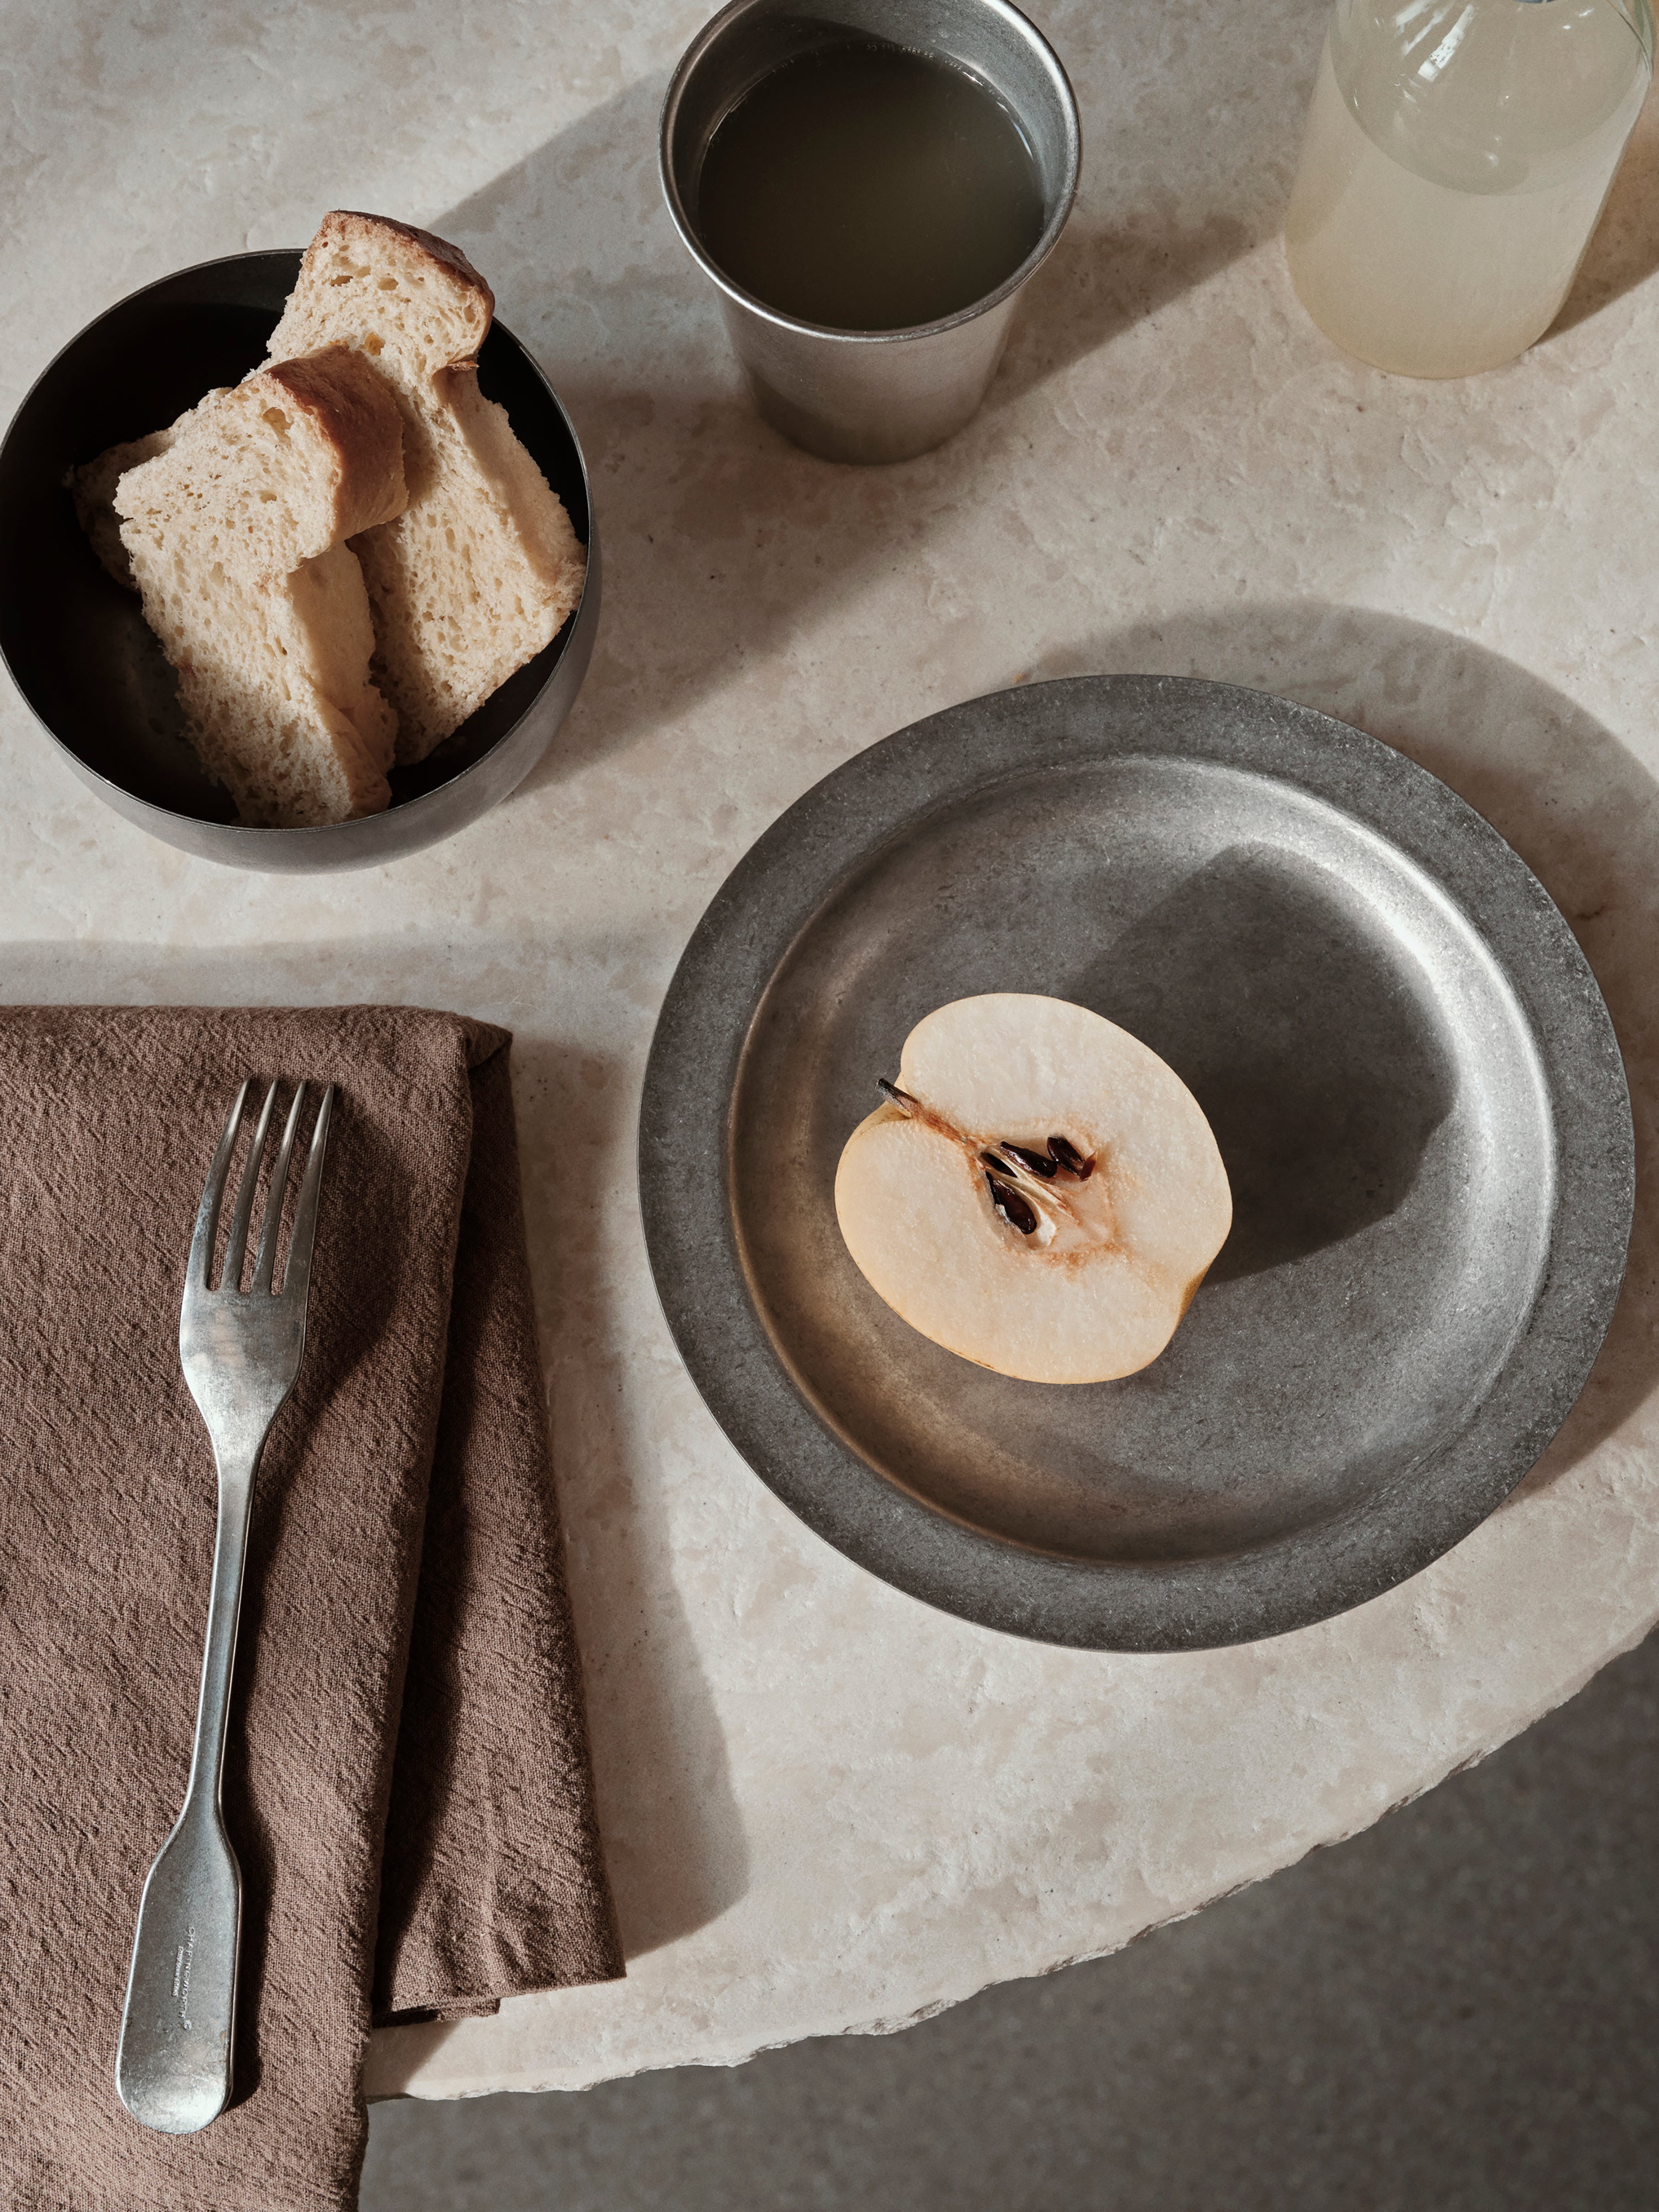 Ferm Living Tumbled Plate Stainless Steel